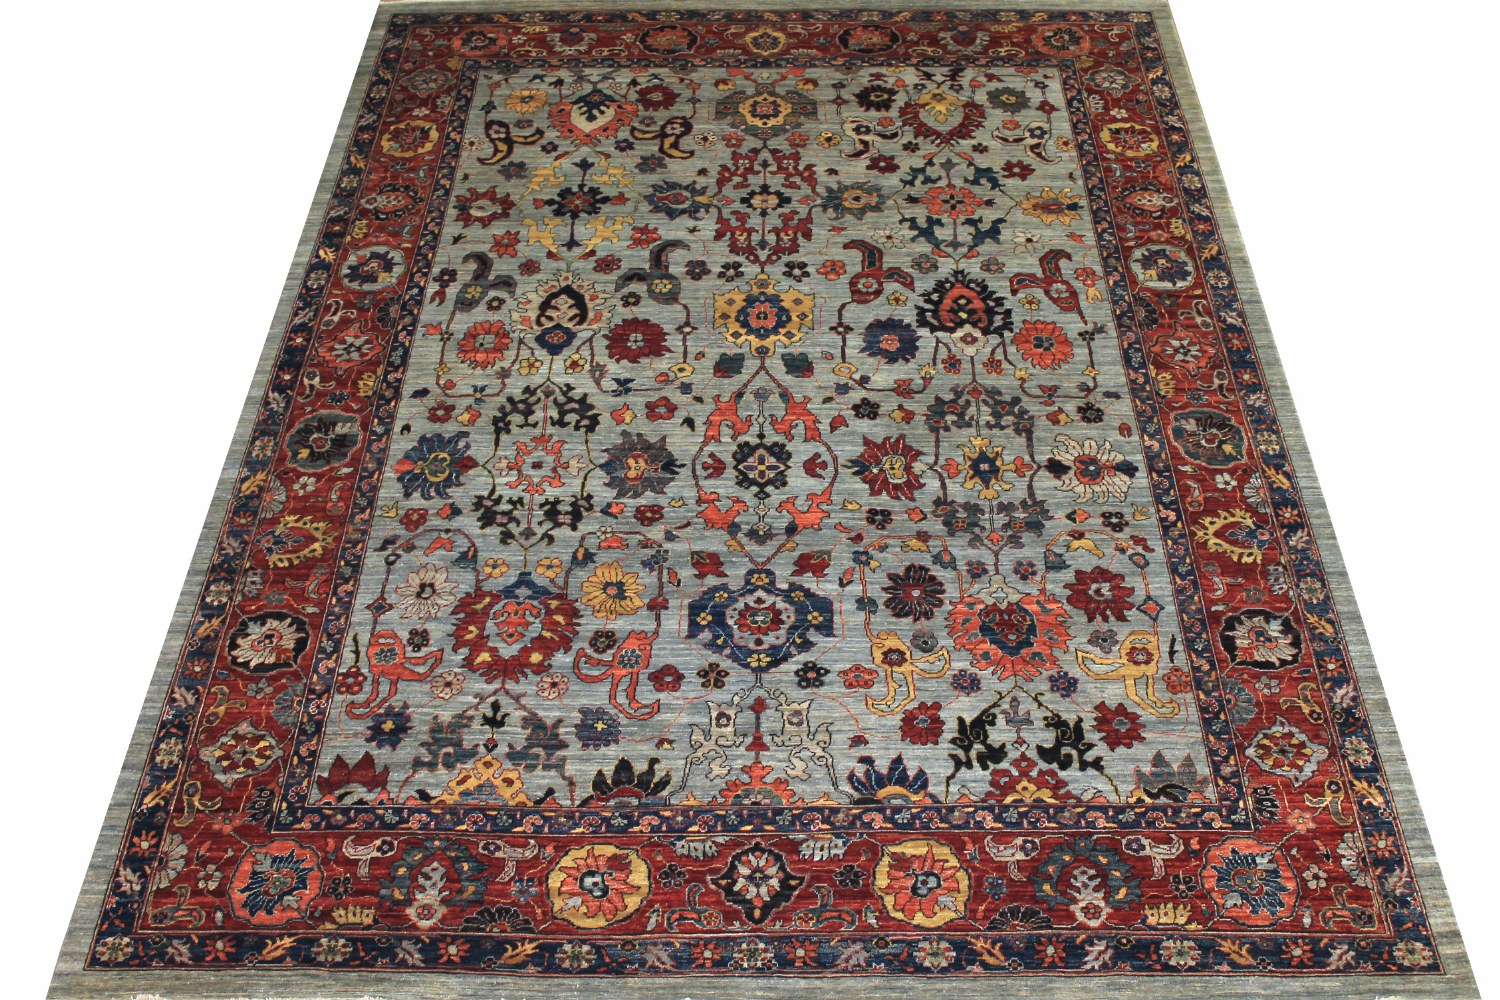 9x12 Antique Revival Hand Knotted Wool Area Rug - MR024560